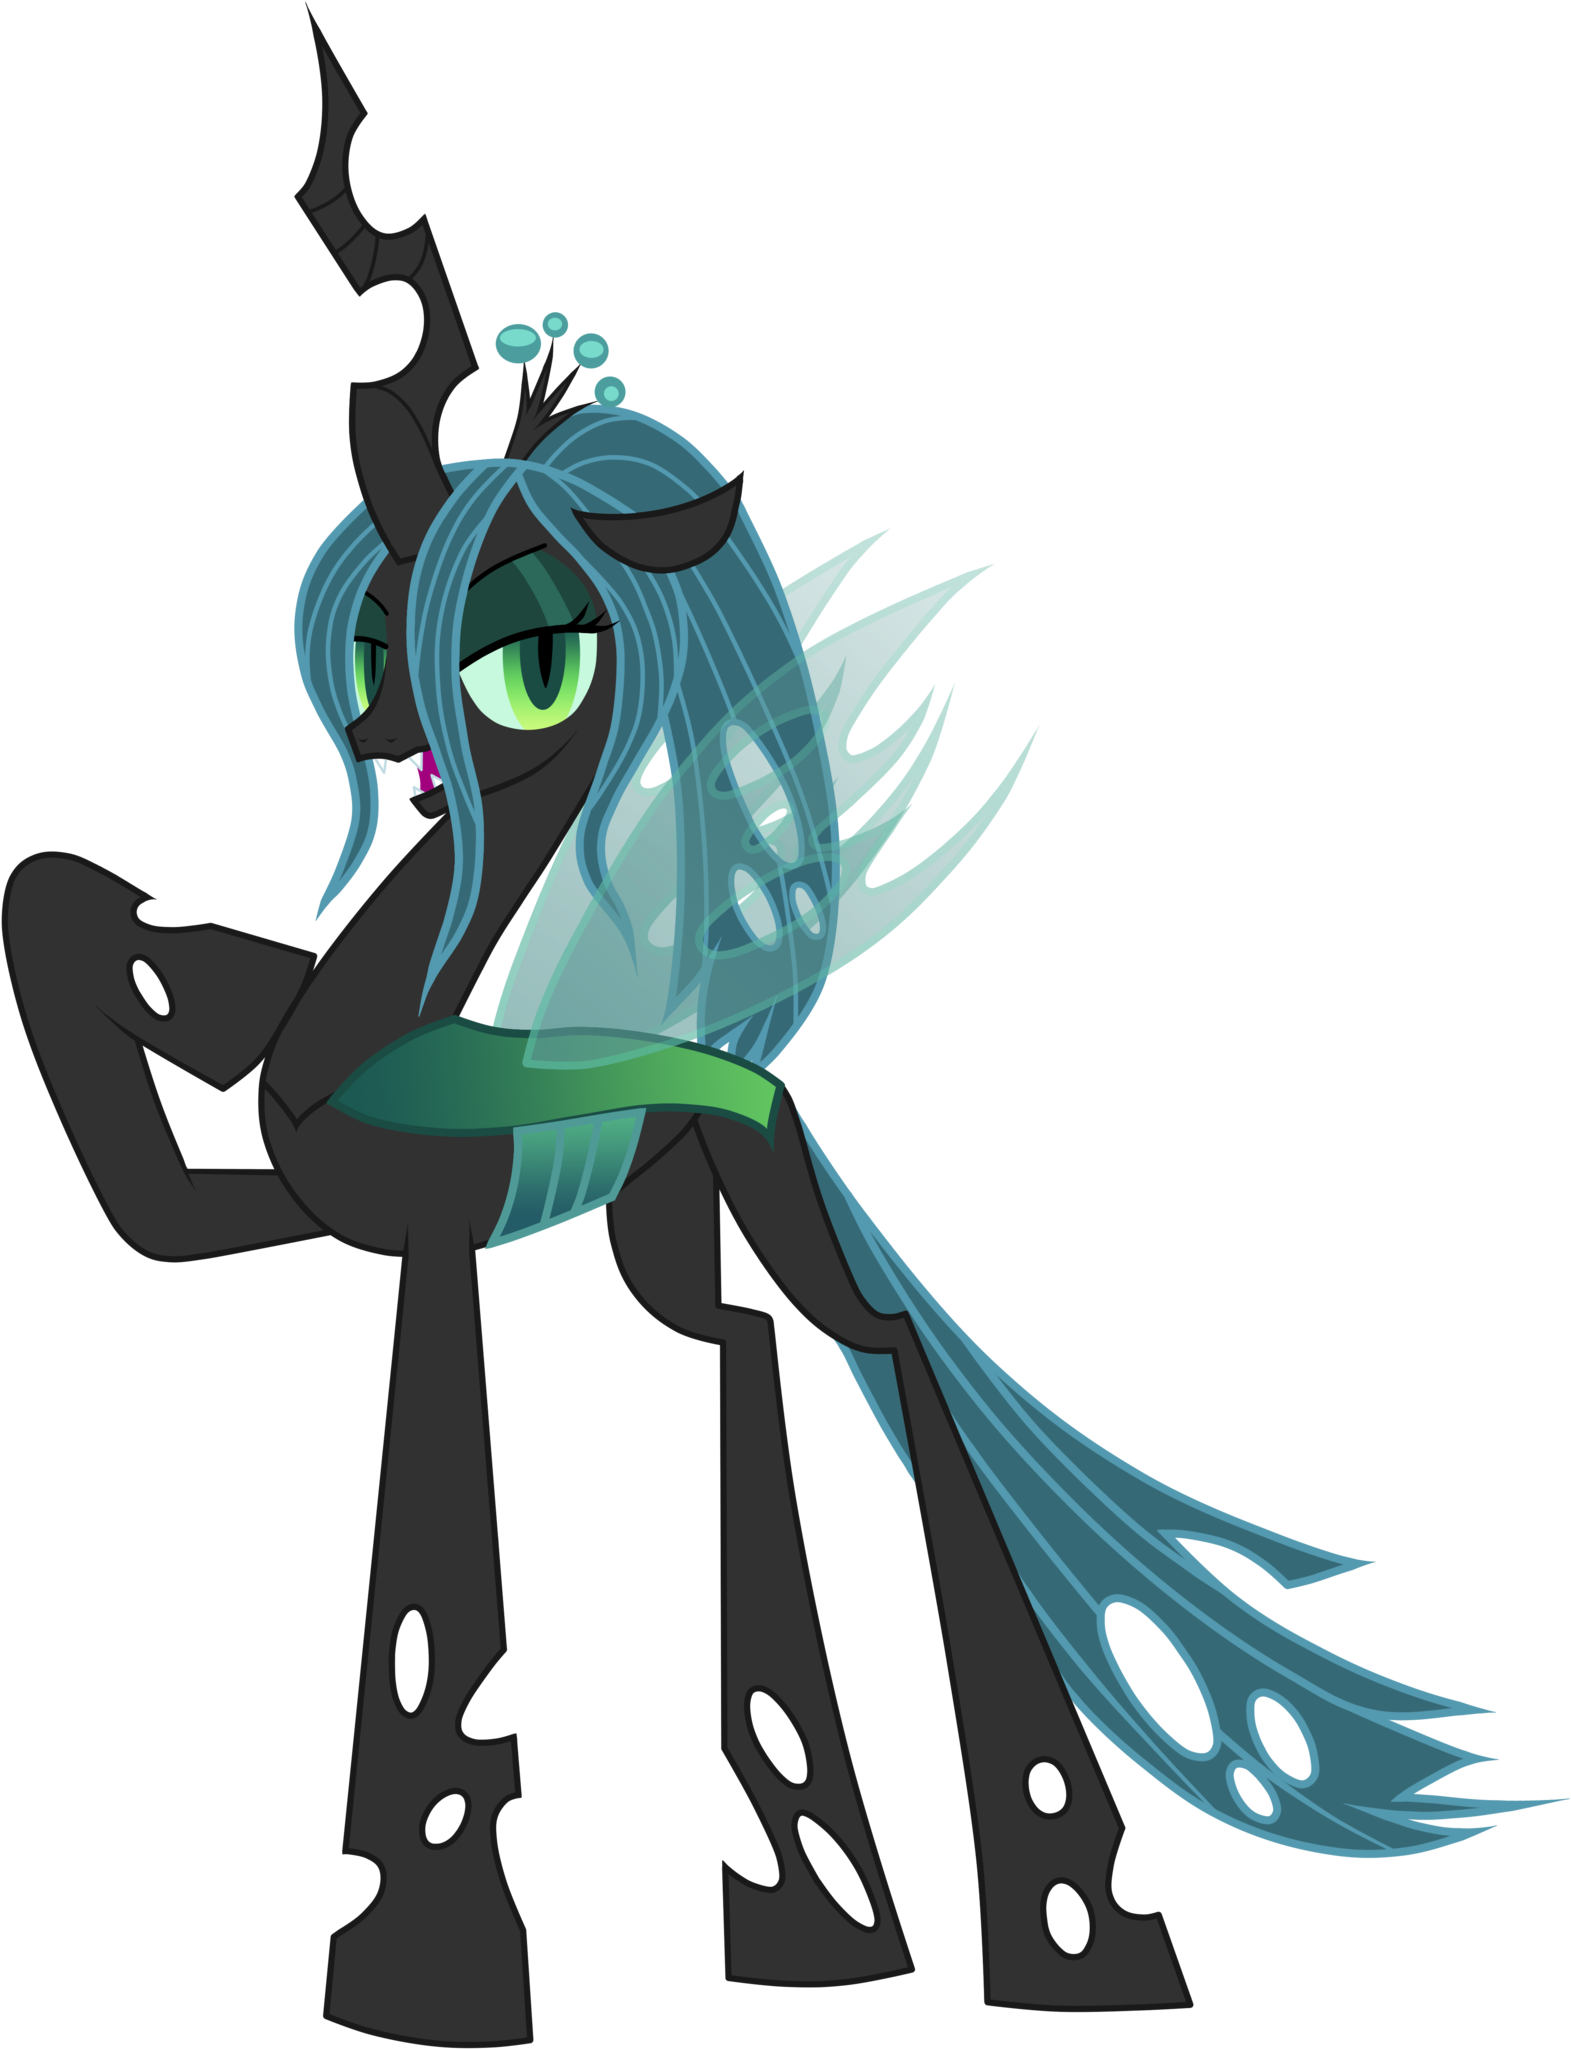 Jennieoo 112 6 Queen Chrysalis With A Ponytail By Jennieoo - My Little Pony Queen Chrysalis (1600x2114)